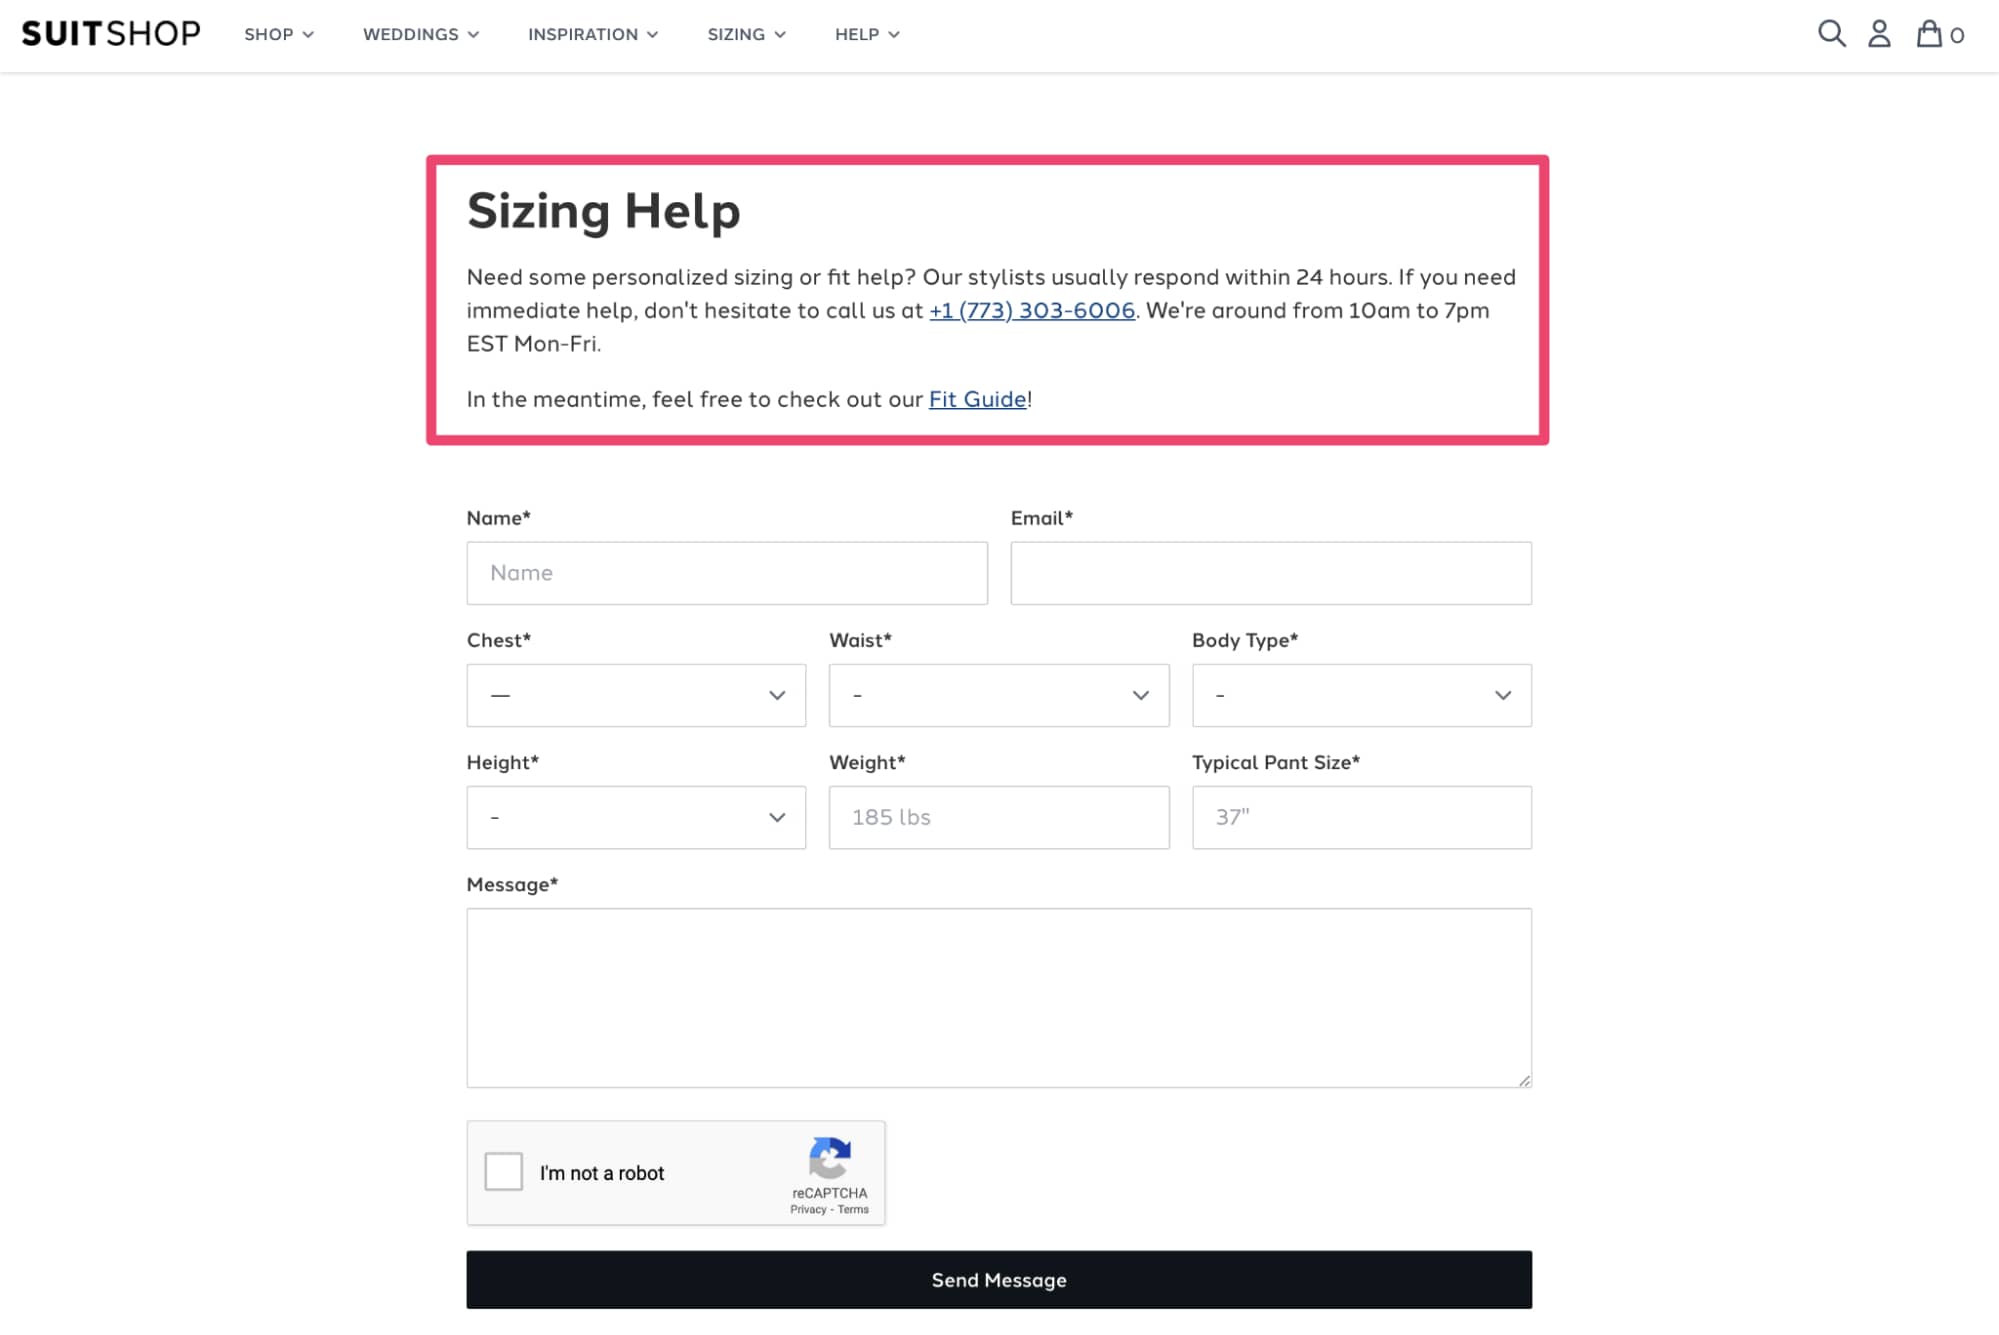 suitshop sizing help page authority social proof